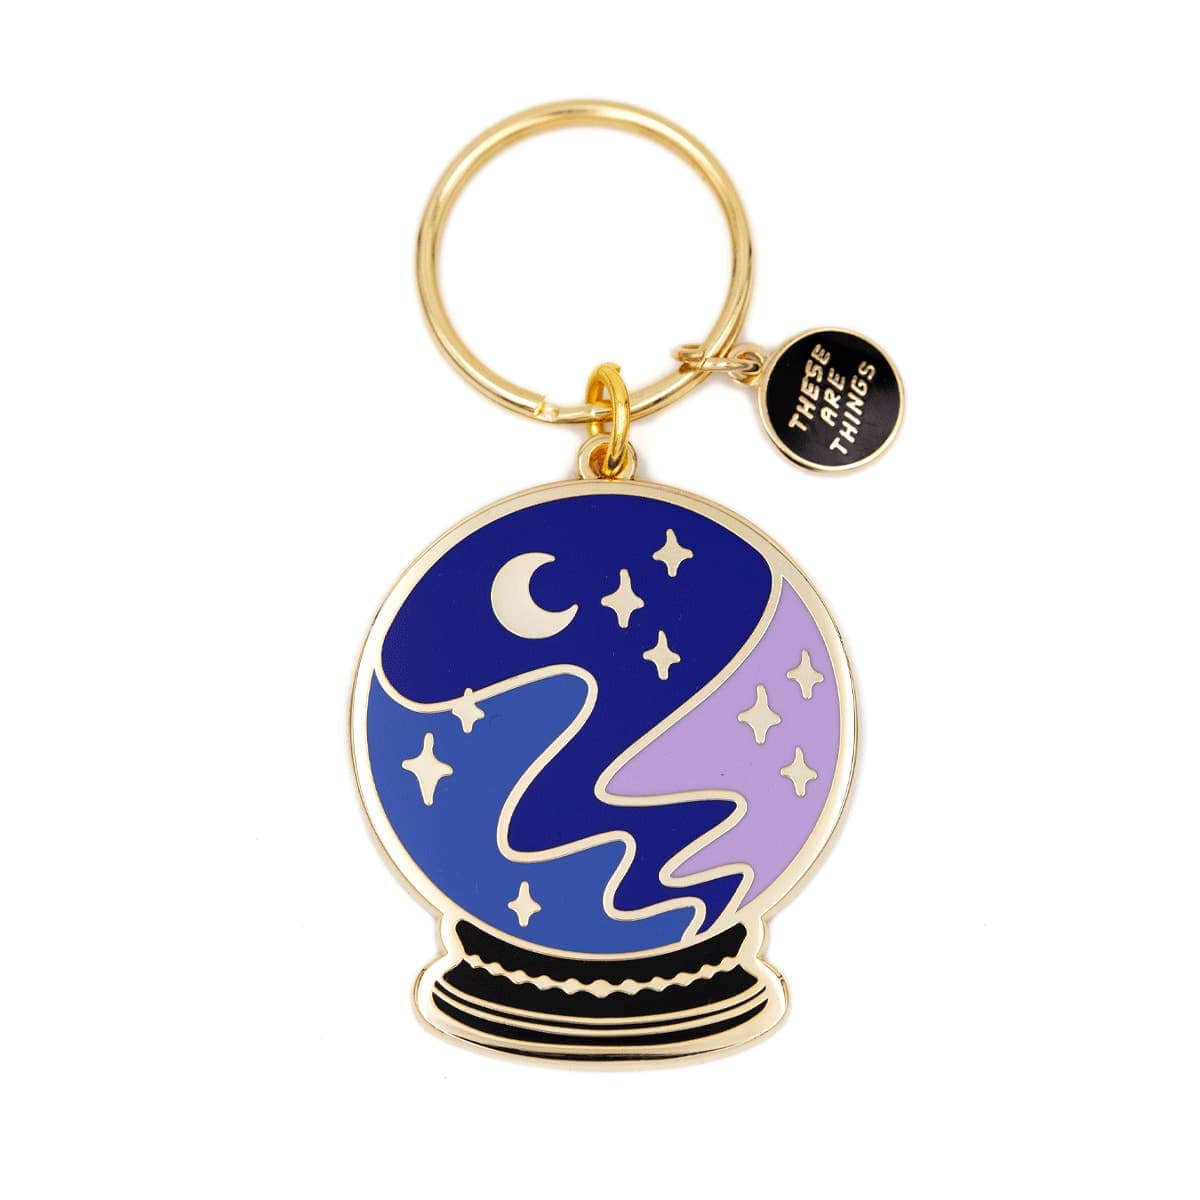 These are Things Crystal Ball Enamel Keychain